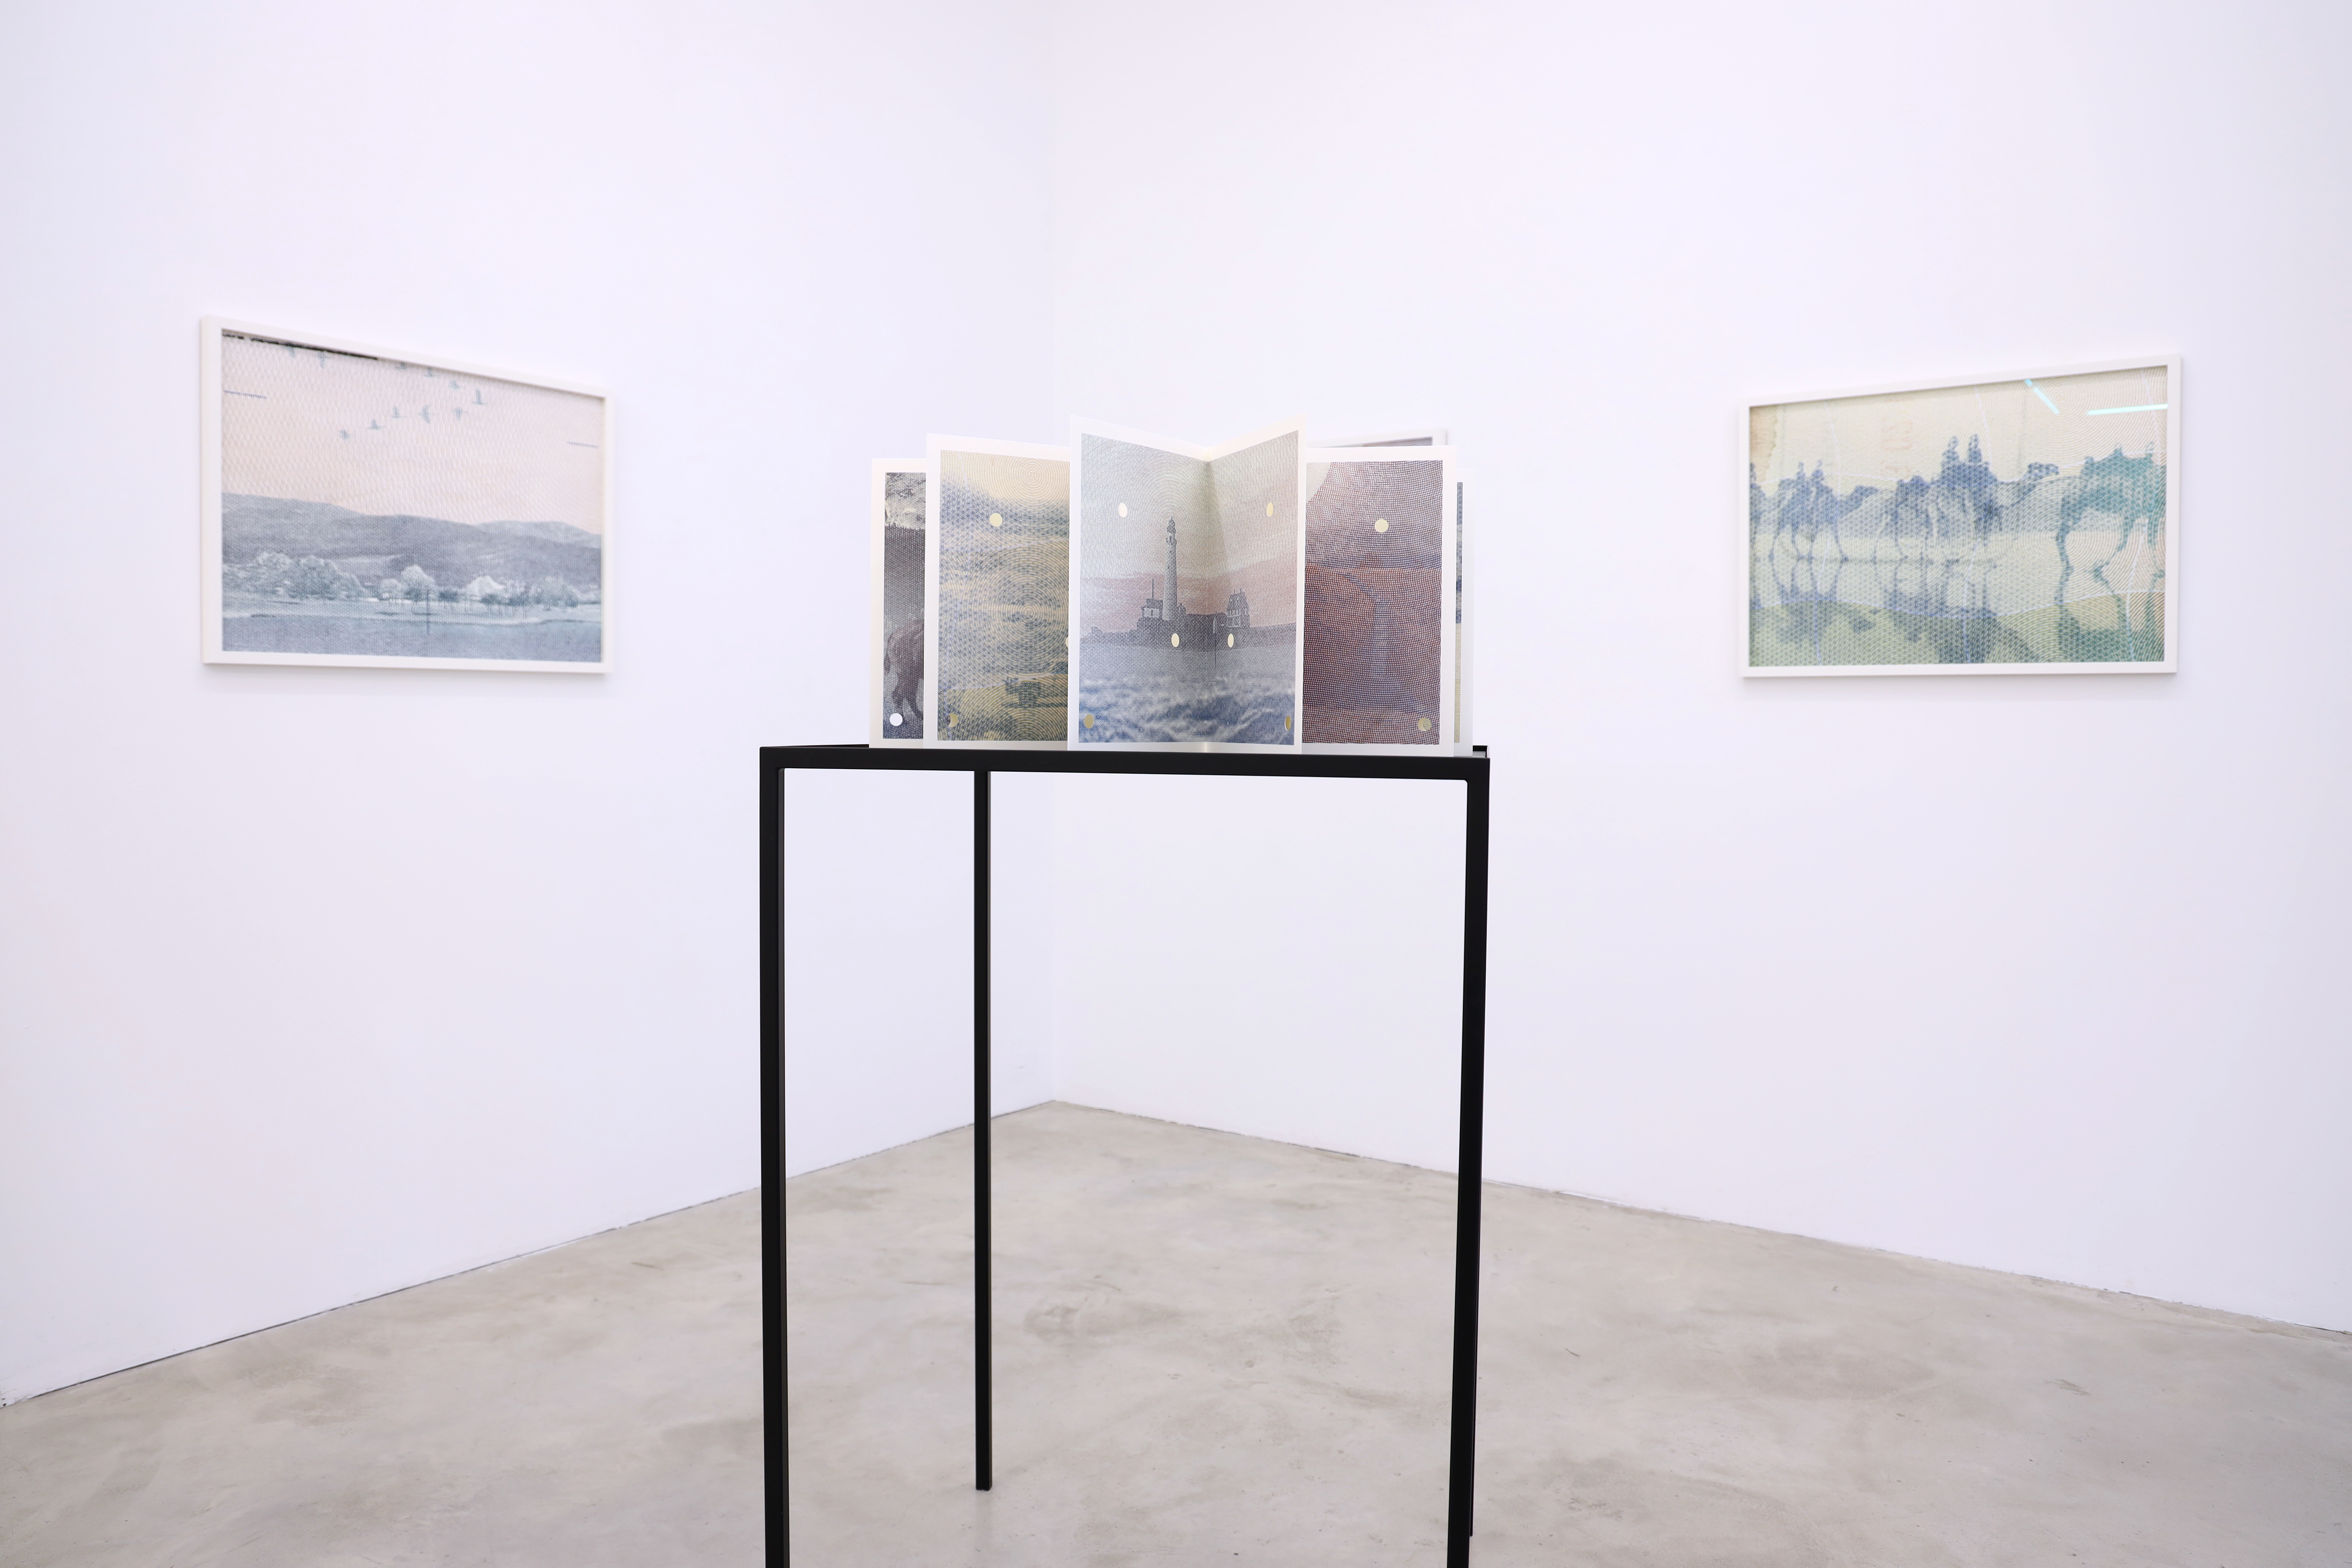 Exhibition view at Persons Projects, Berlin, 2021/2022